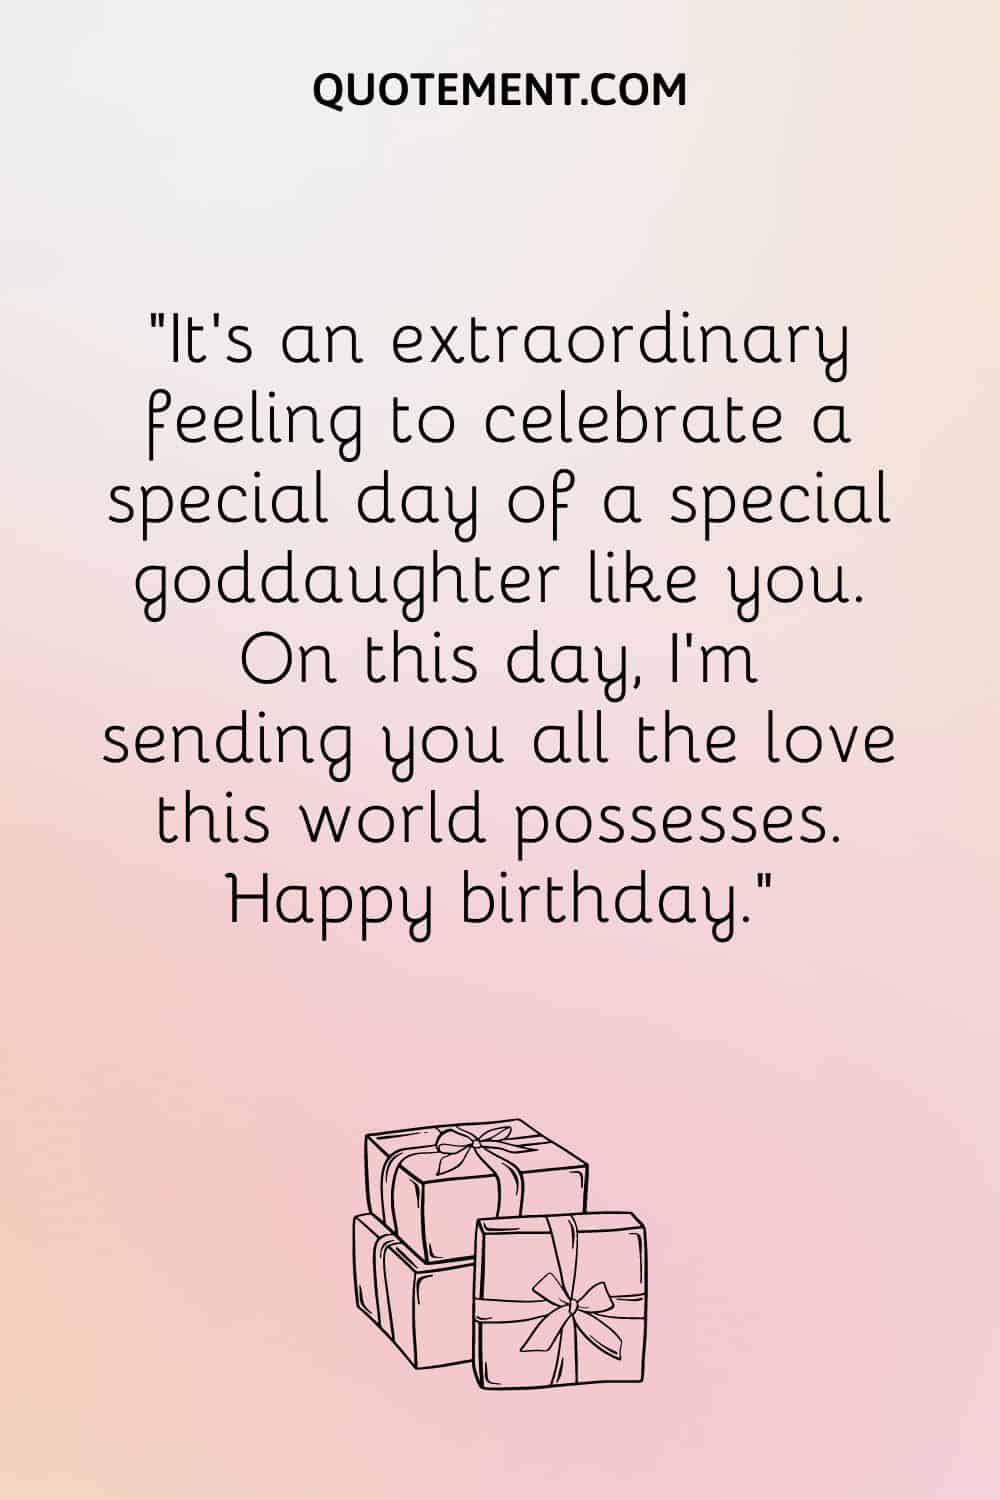 “It’s an extraordinary feeling to celebrate a special day of a special goddaughter like you. On this day, I’m sending you all the love this world possesses. Happy birthday.”